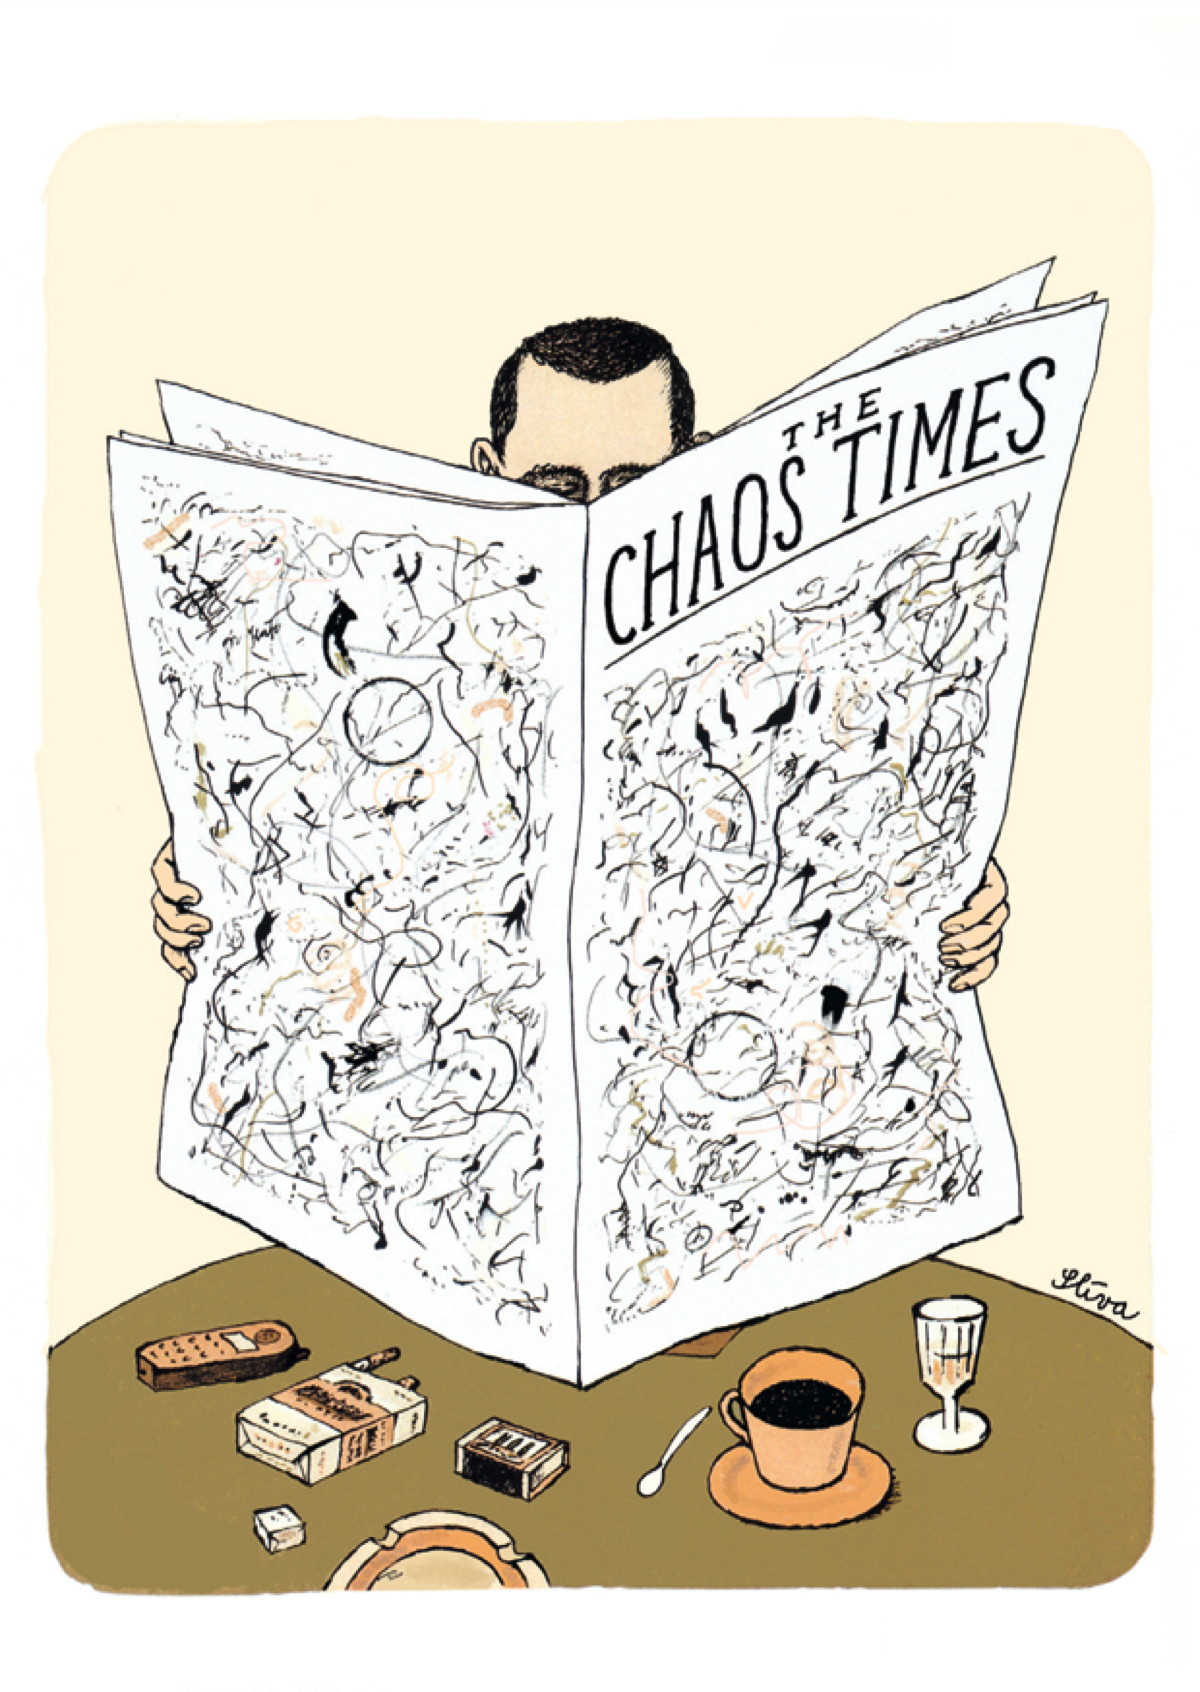 The Chaos Times